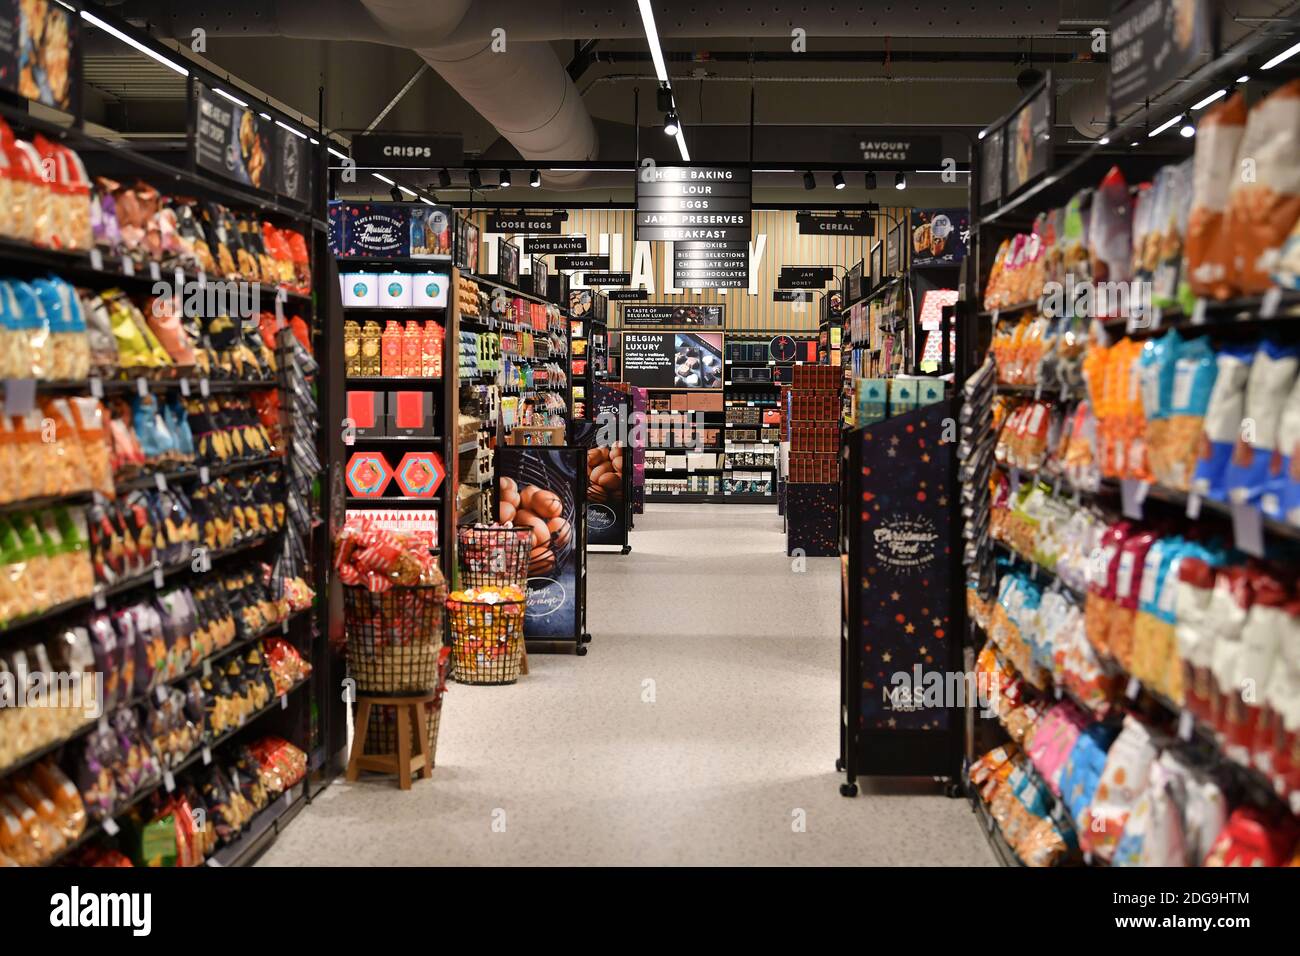 Marks & Spencer M&S Food Shop in Two Rivers, Staines, Surrey, giovedì 2 dicembre 2020. Foto Stock